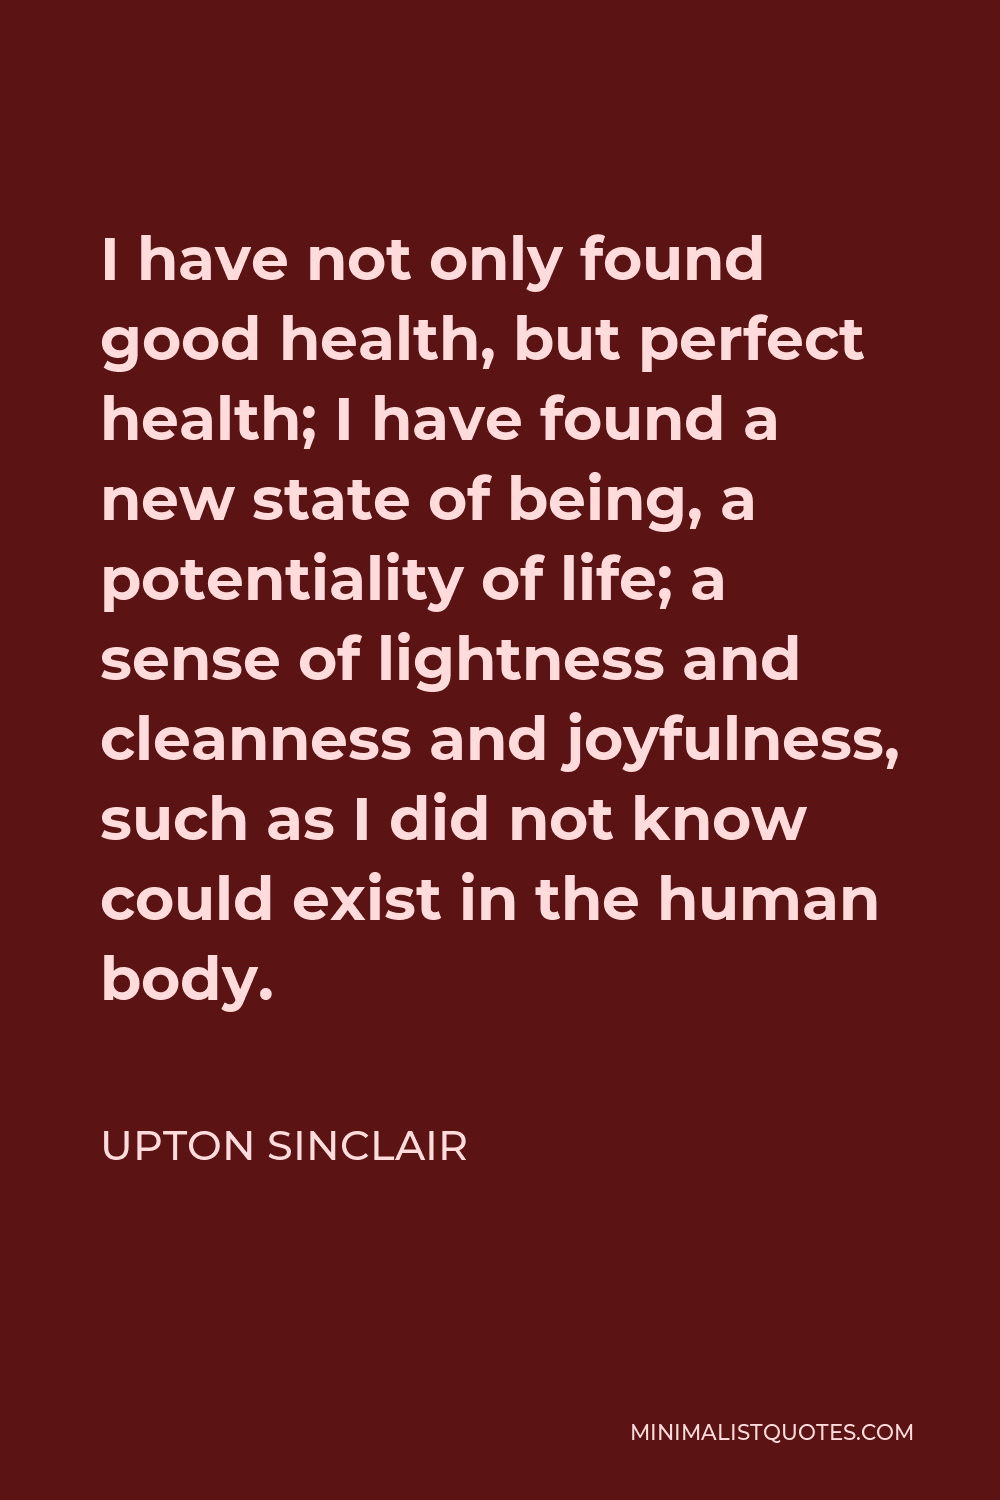 Upton Sinclair Quote - I have not only found good health, but perfect health; I have found a new state of being, a potentiality of life; a sense of lightness and cleanness and joyfulness, such as I did not know could exist in the human body.